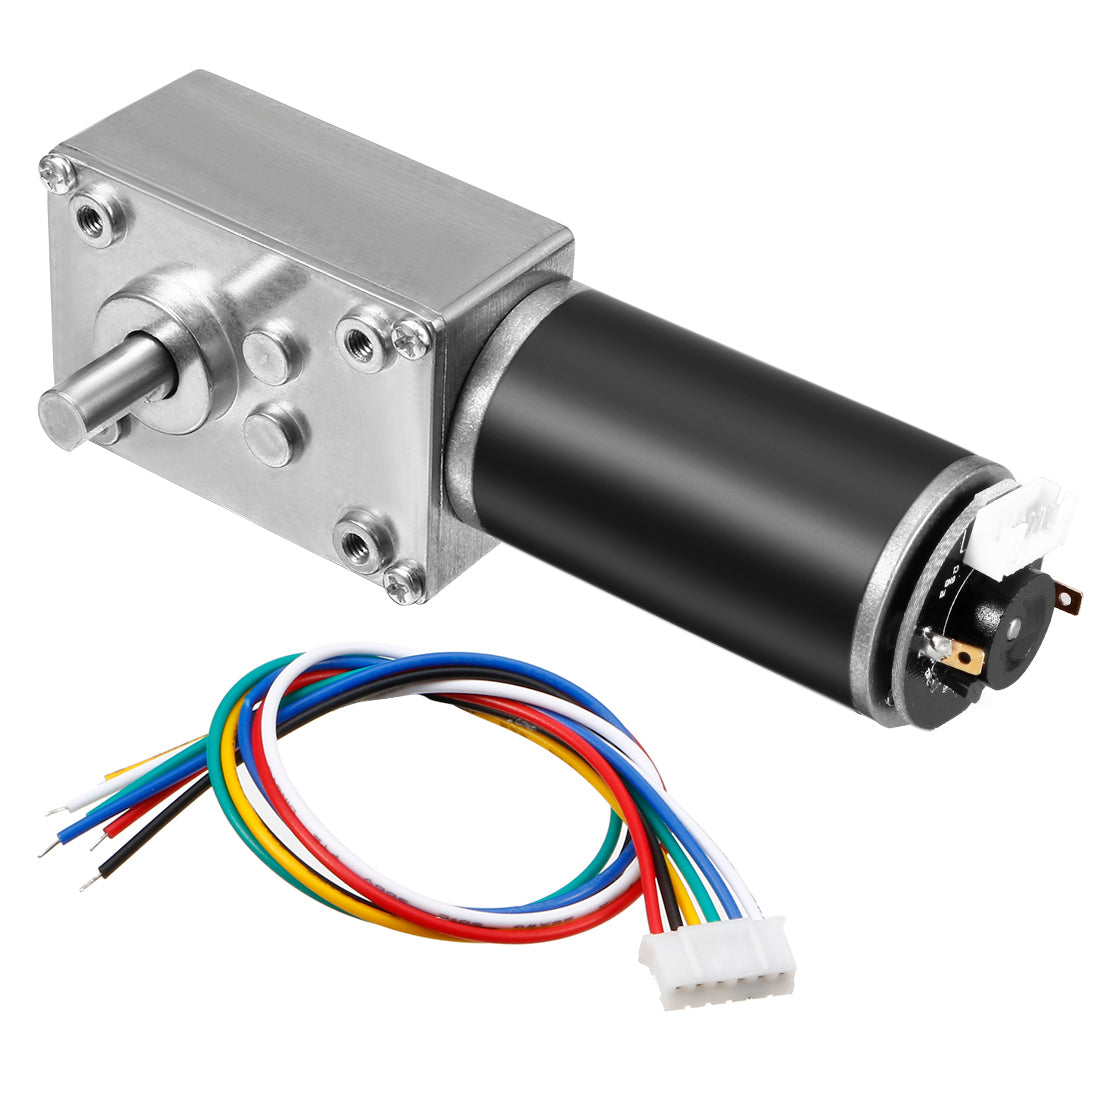 uxcell Uxcell DC 12V 7RPM 30Kg.cm Self-Locking Worm Gear Motor With Encoder And Cable, High Torque Speed Reduction Motor